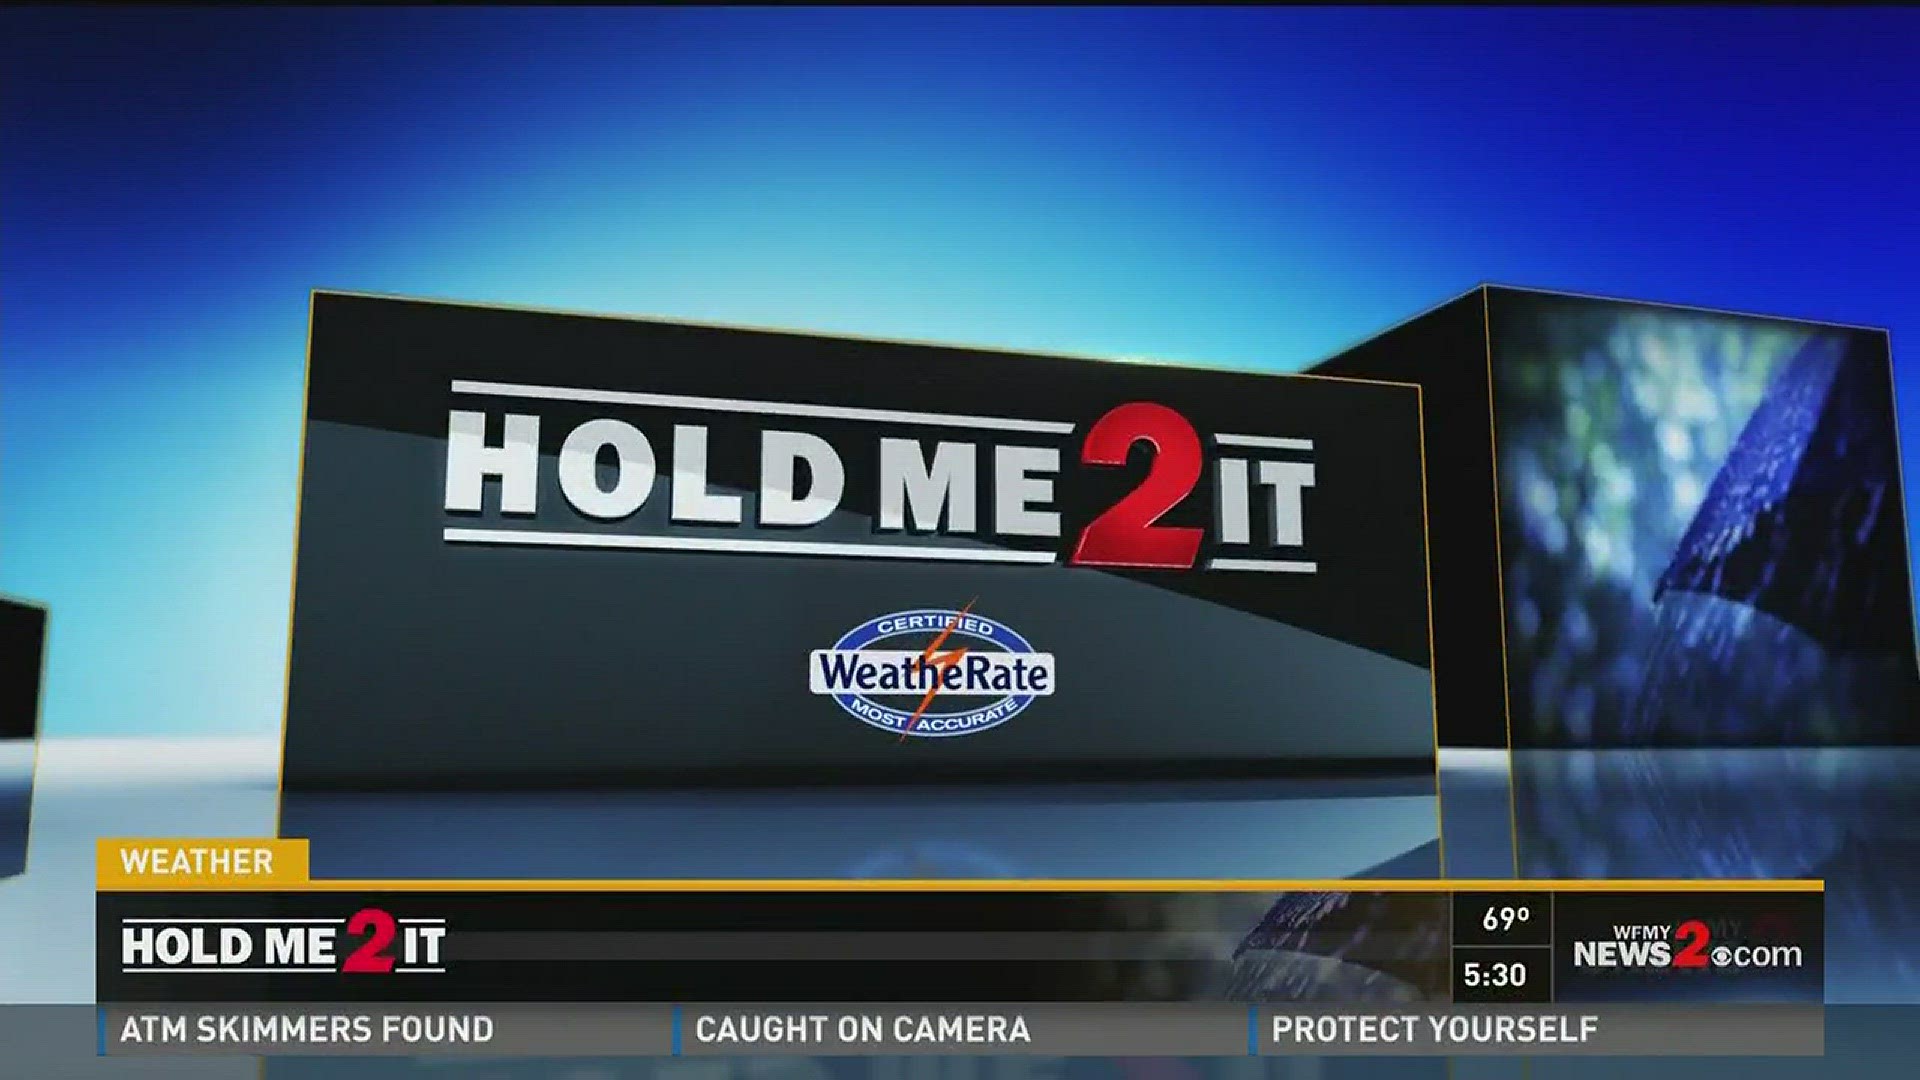 Hold Me 2 It Forecast: Tuesday March 7, 2017